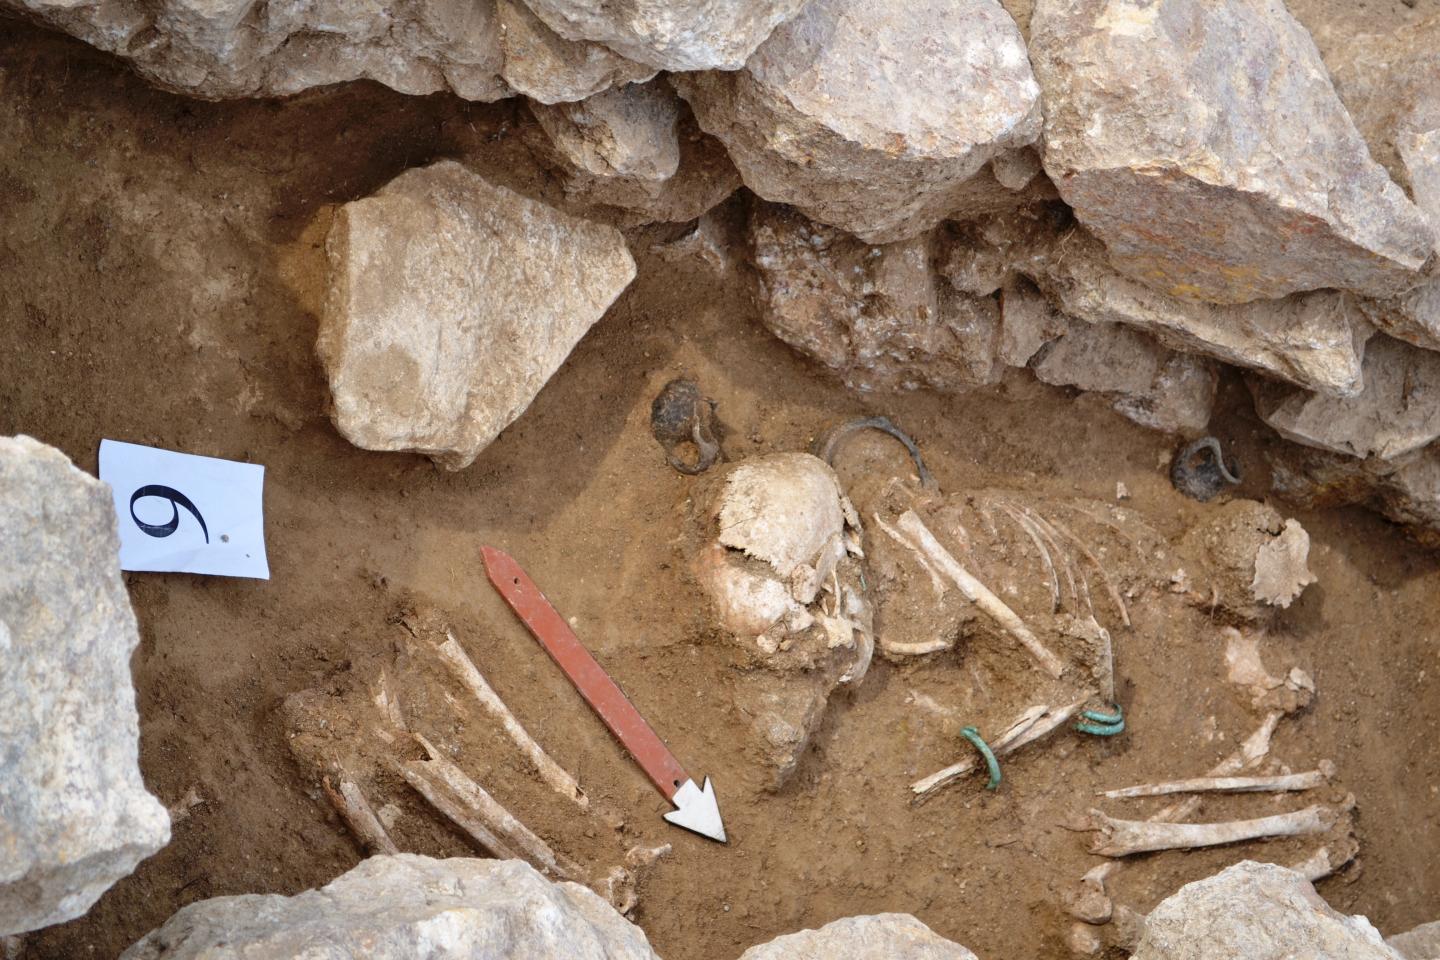 Human Remains in Armenia from Early Iron Age